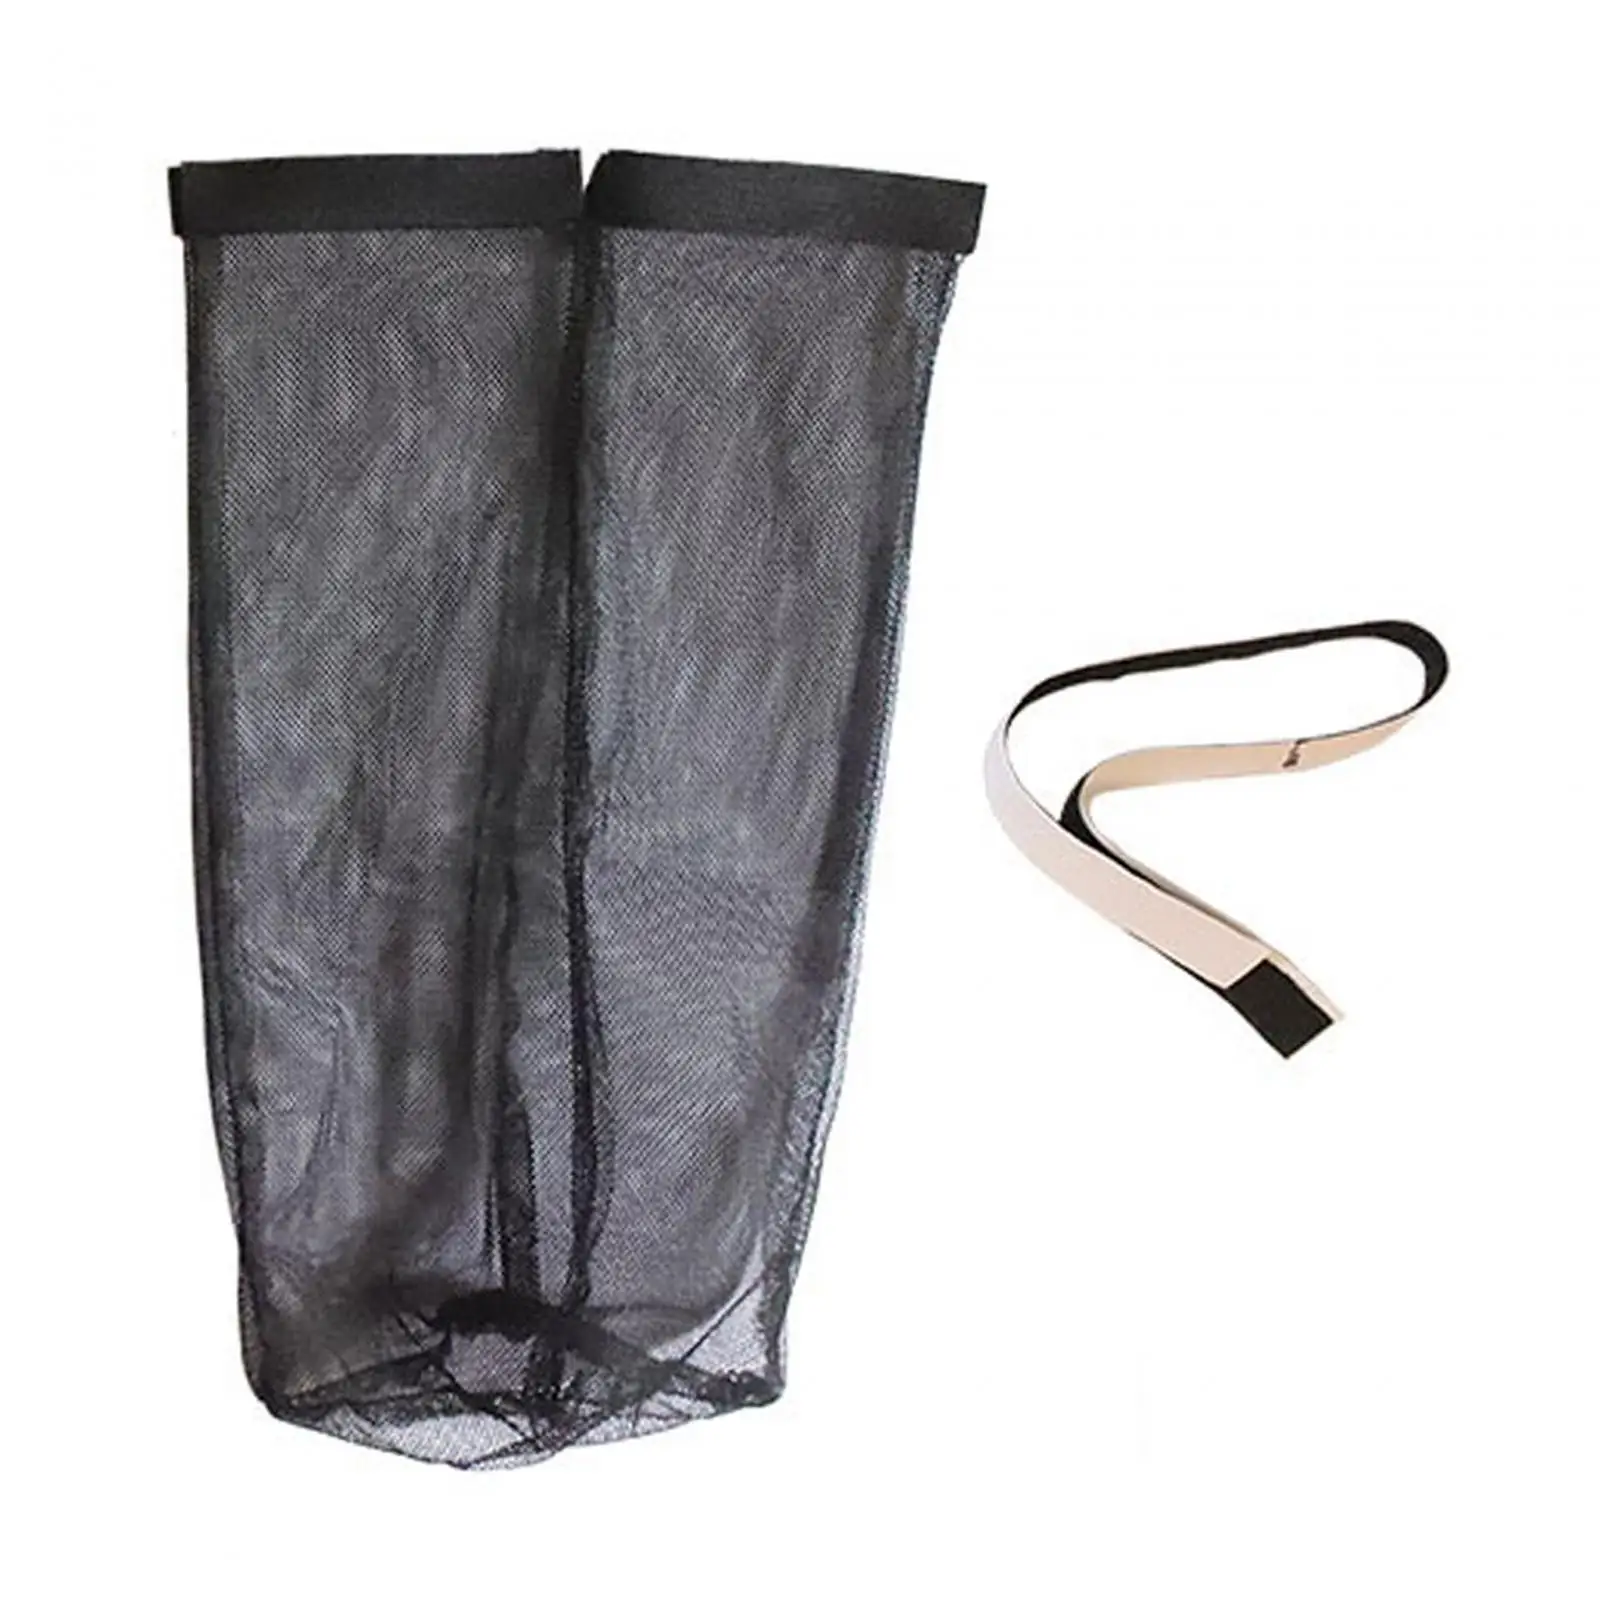 Dryer Lint Bag Catcher Durable Replacement Polyester Easy Installation 39x13cm for Outdoor Dryer Vent Black Lint Dust Filter Bag